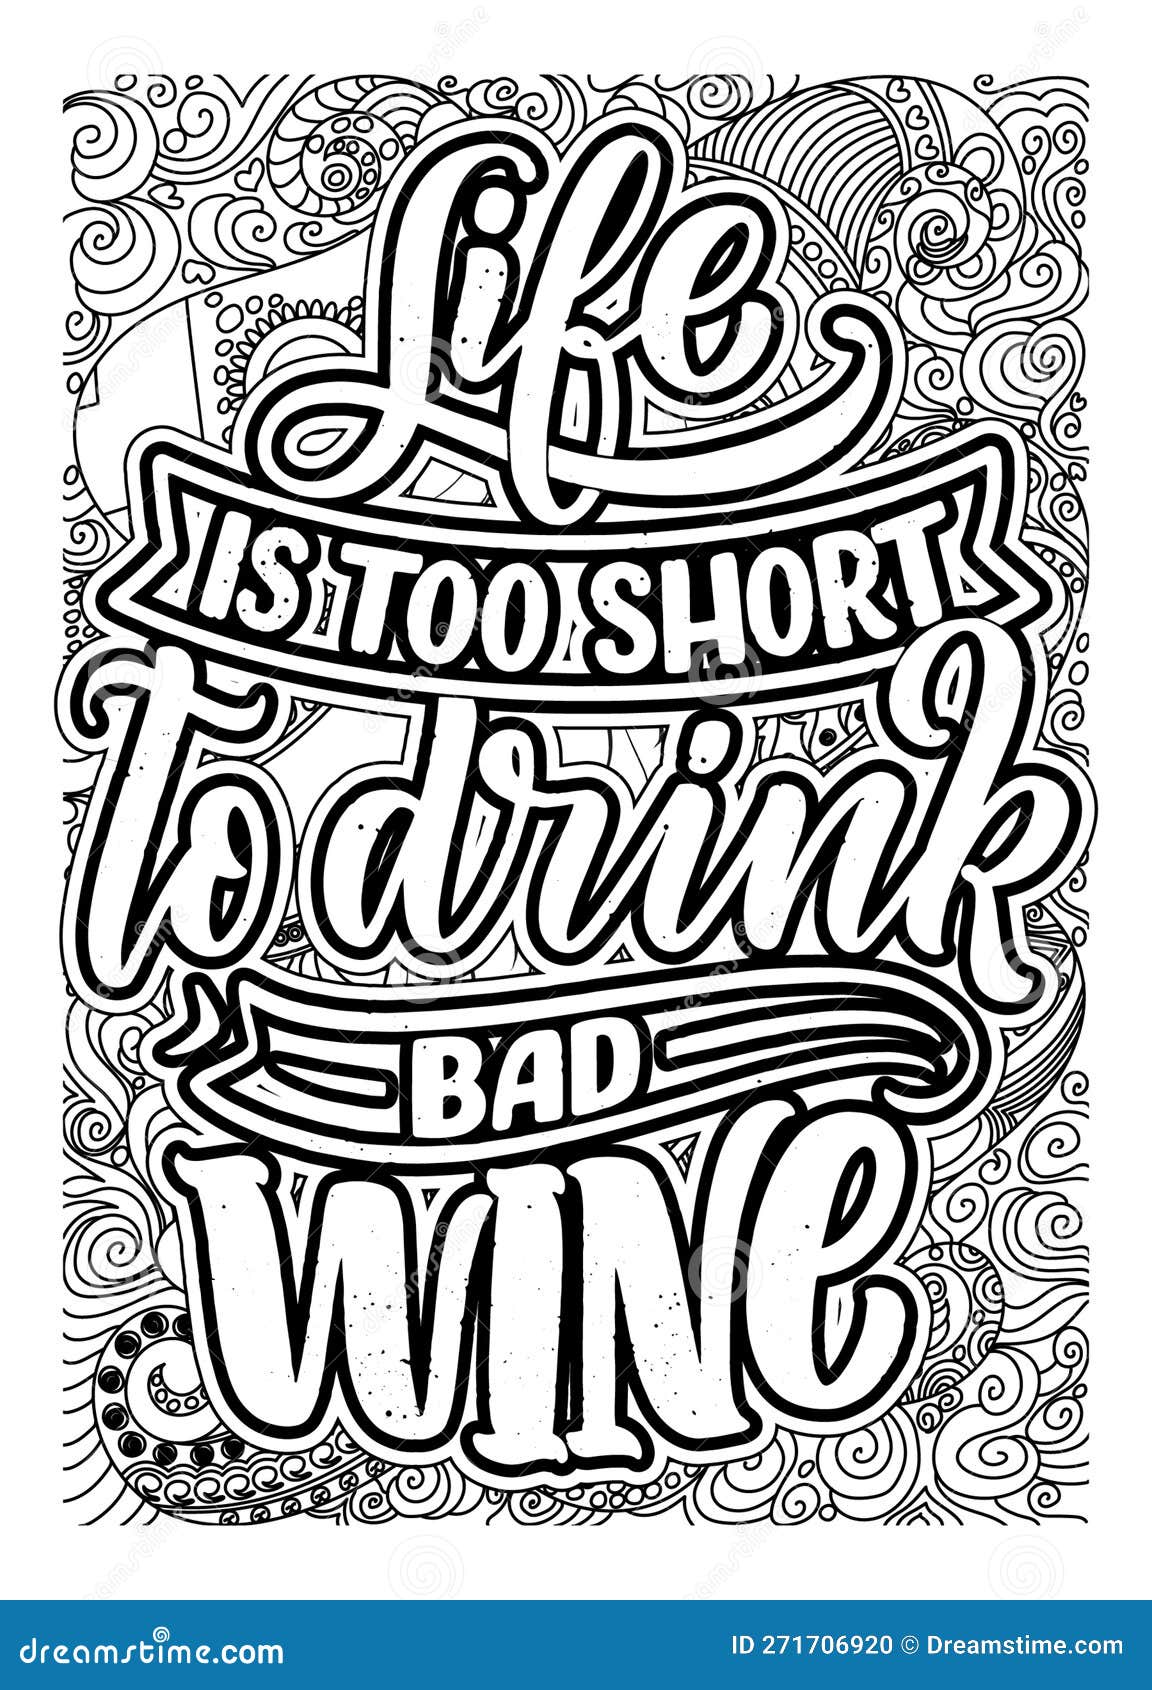 Wine inspirational quote coloring pages for adults motivational quotes coloring page stock illustration